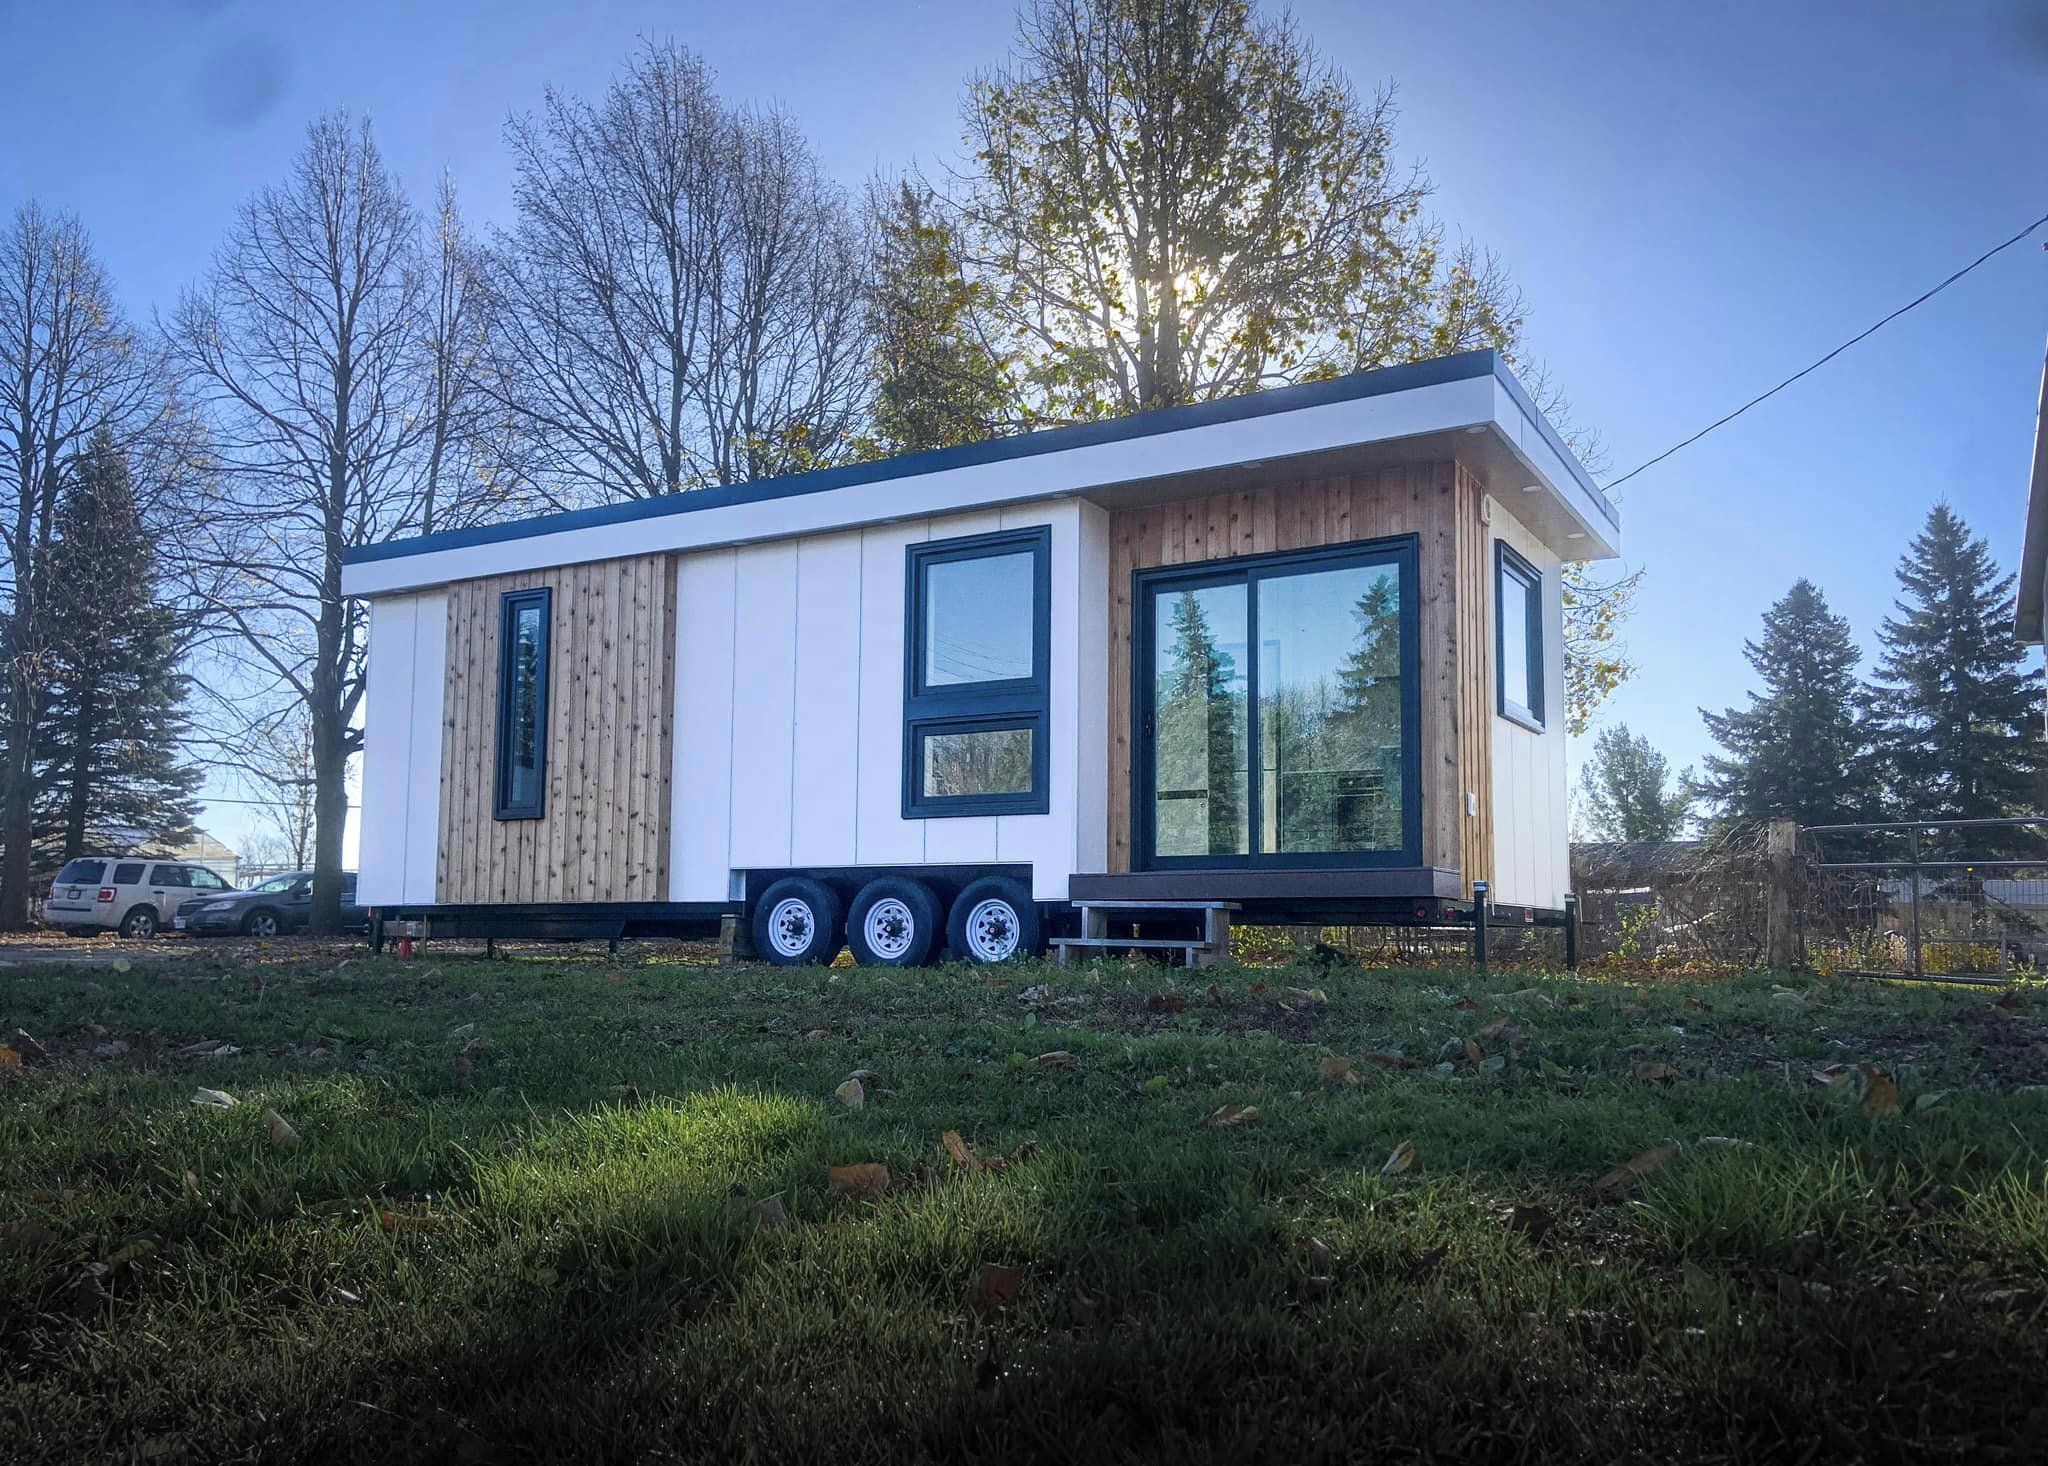 Ontario's Cheap Tiny Homes Let You Live Your Best Minimalist Life